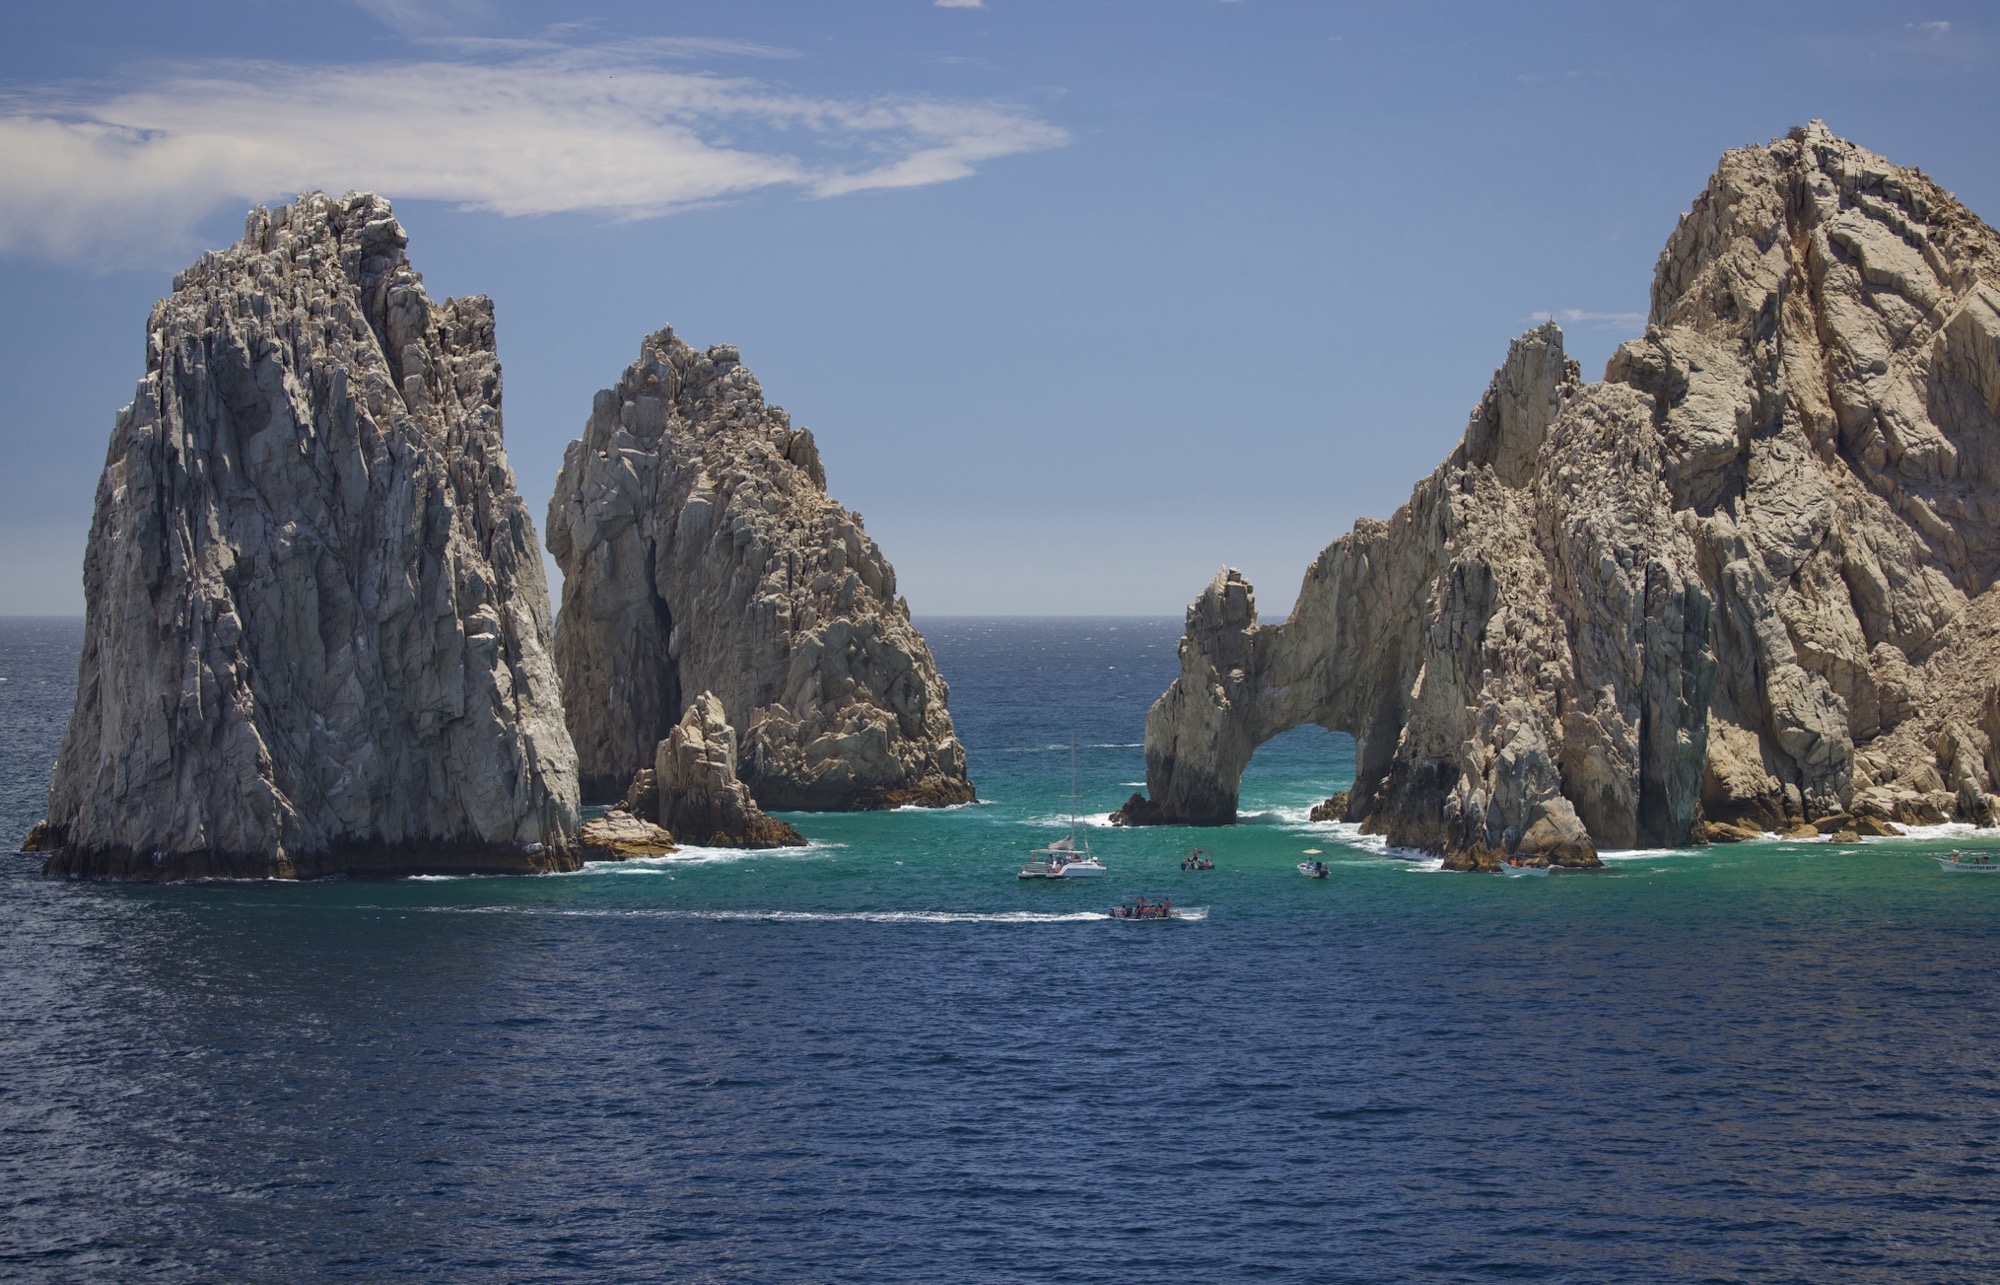 El Arco - Cabo's famous beaches and rocks as the ship leaves port. Aboard the Nieuw Amsterdam, Cabo San Lucas